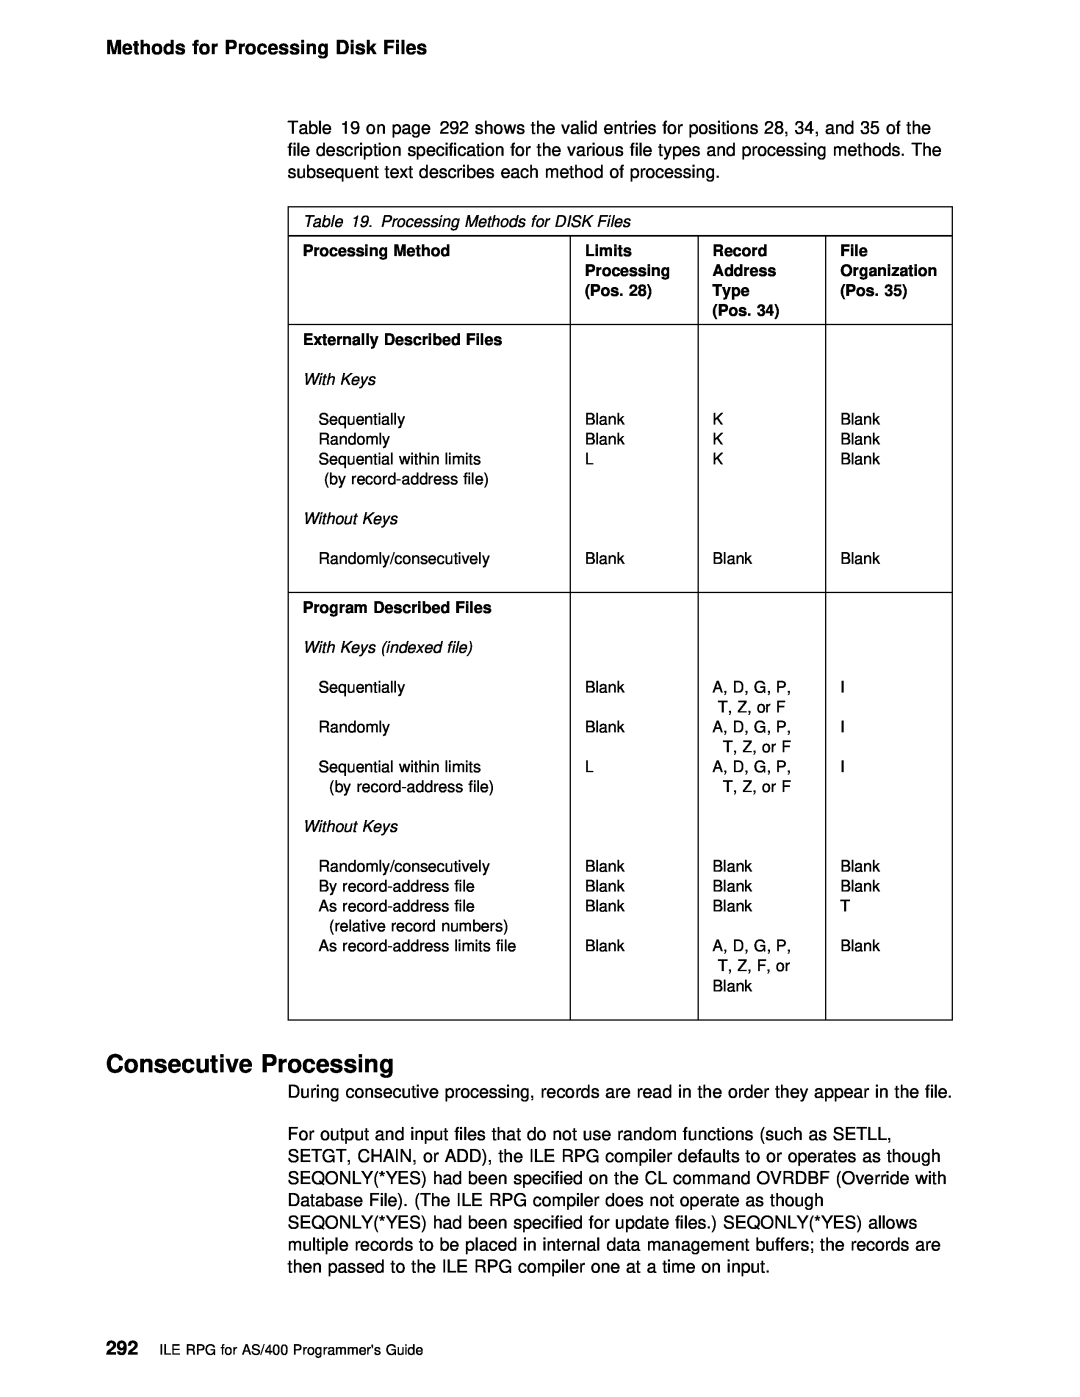 IBM AS/400 manual Consecutive Processing, Methods for Processing Disk Files, subsequent, text, describes, each, method of 